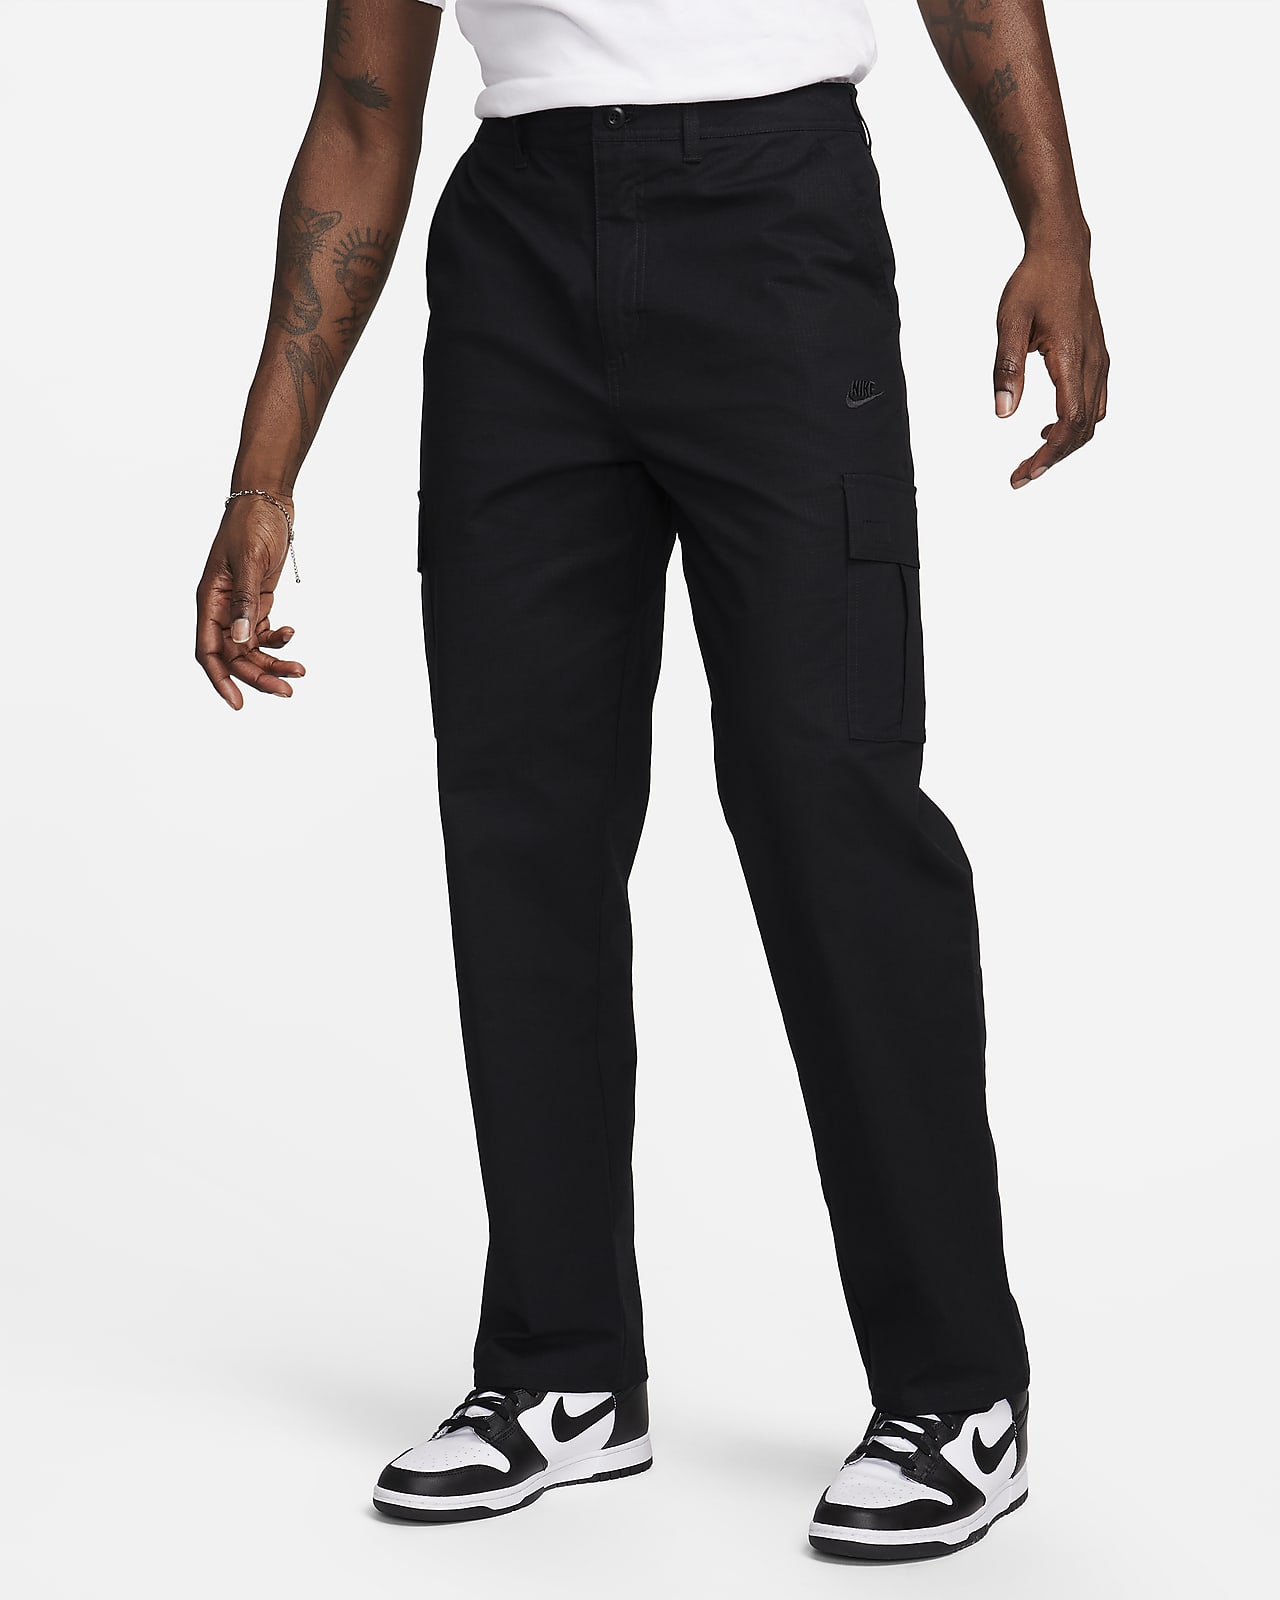 https://static.nike.com/a/images/t_PDP_1280_v1/f_auto,q_auto:eco/b09410bd-c64f-474c-b86f-4f6898a18e76/club-cargo-trousers-wnLBrK.png